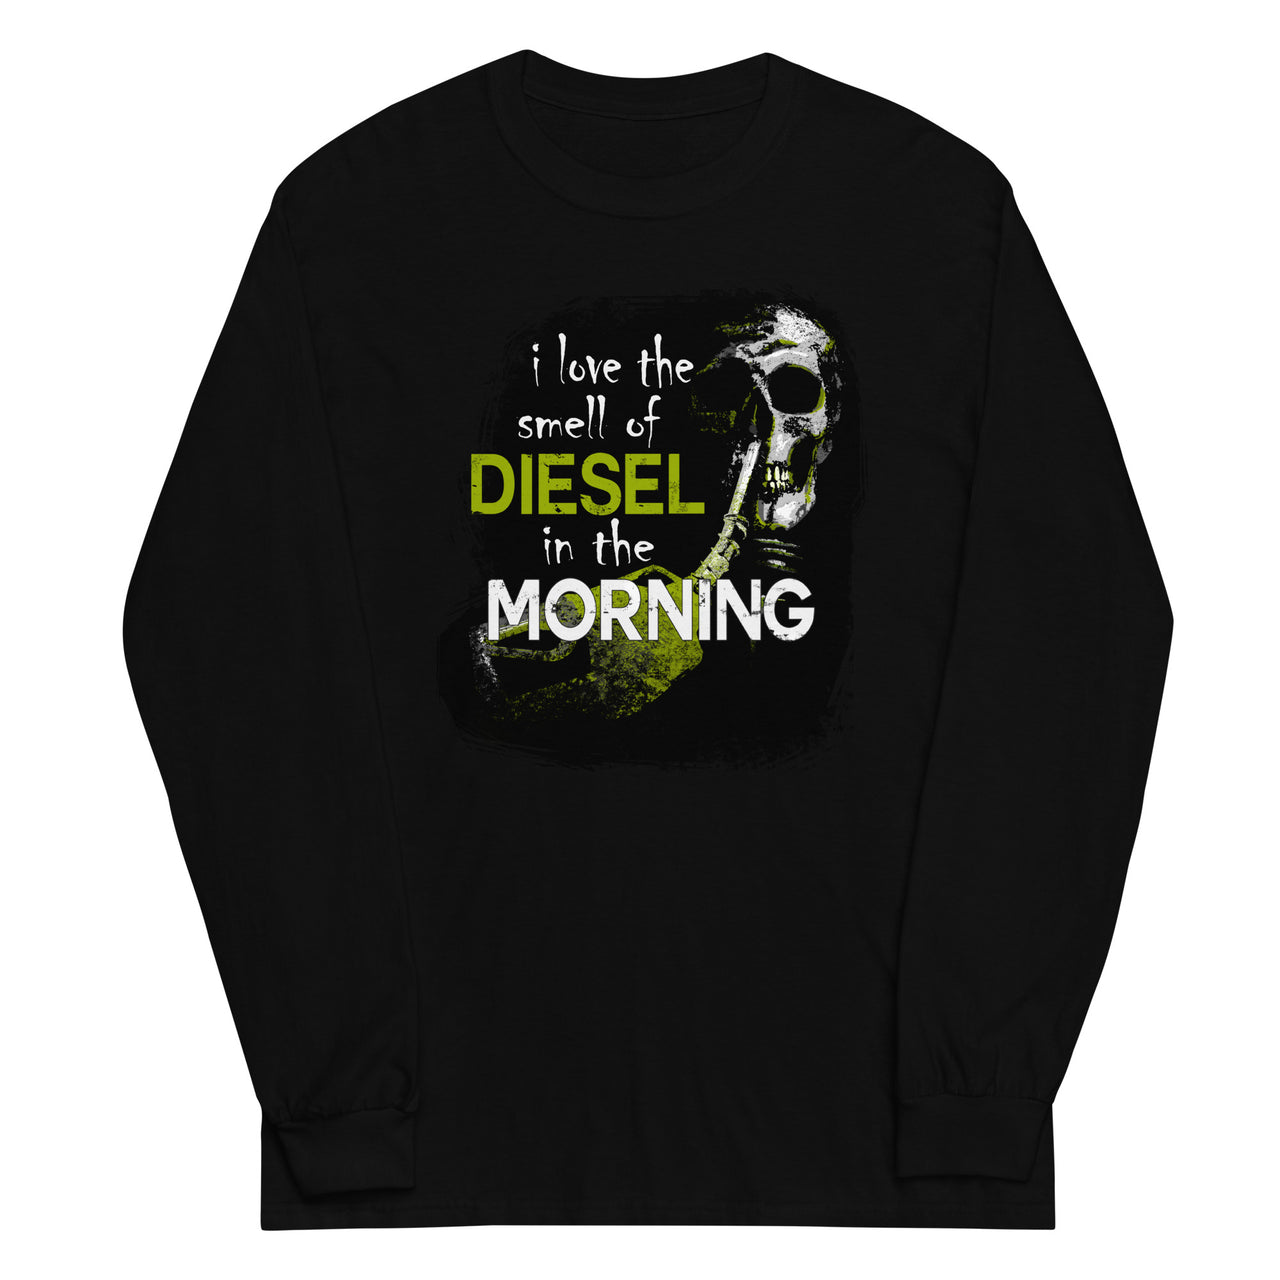 Truck Long Sleeve T-Shirt - I Love The Smell of Diesel In The Morning in black